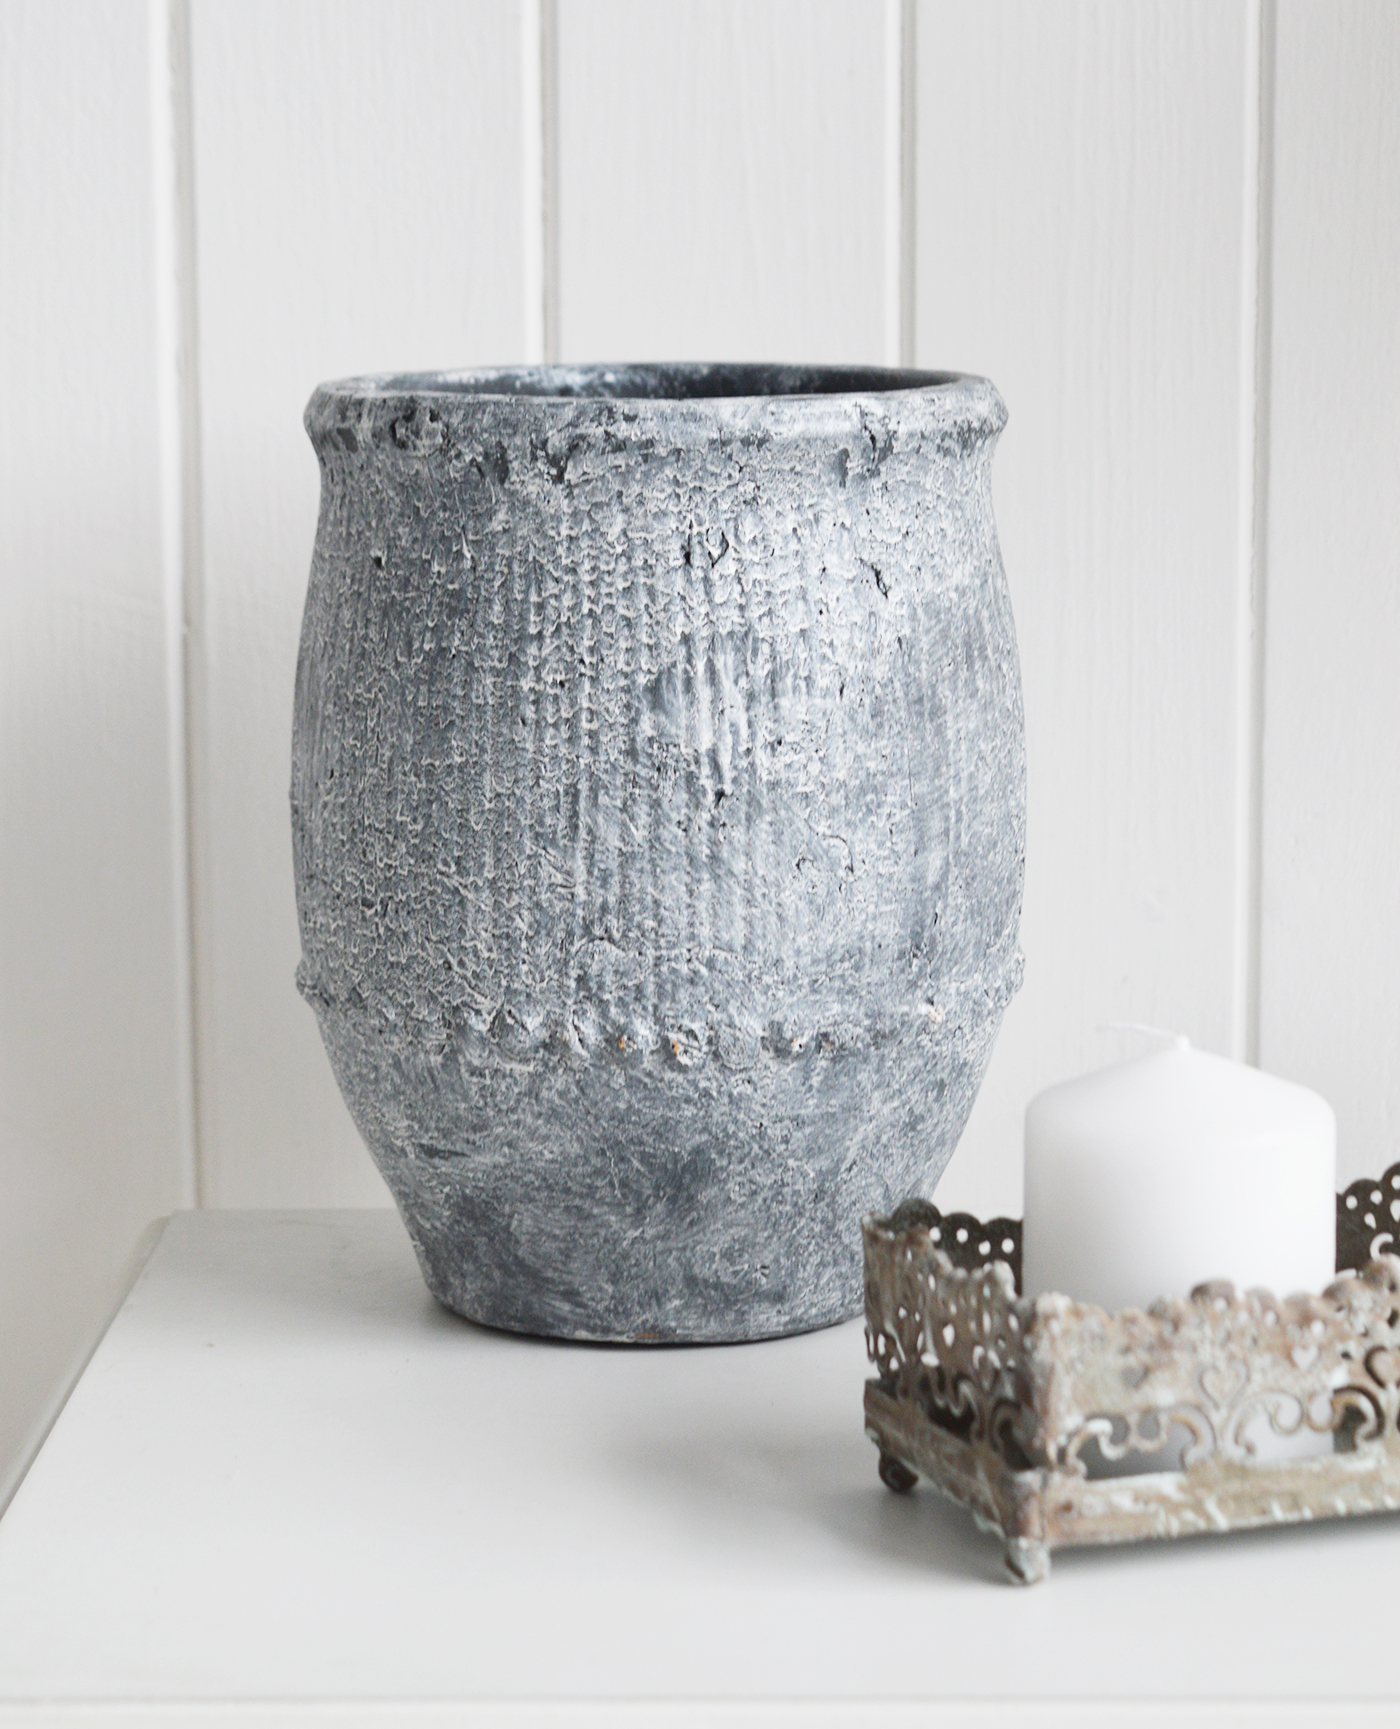 New England style interiors - Grey stone wash vase for country and coastal interior home decor